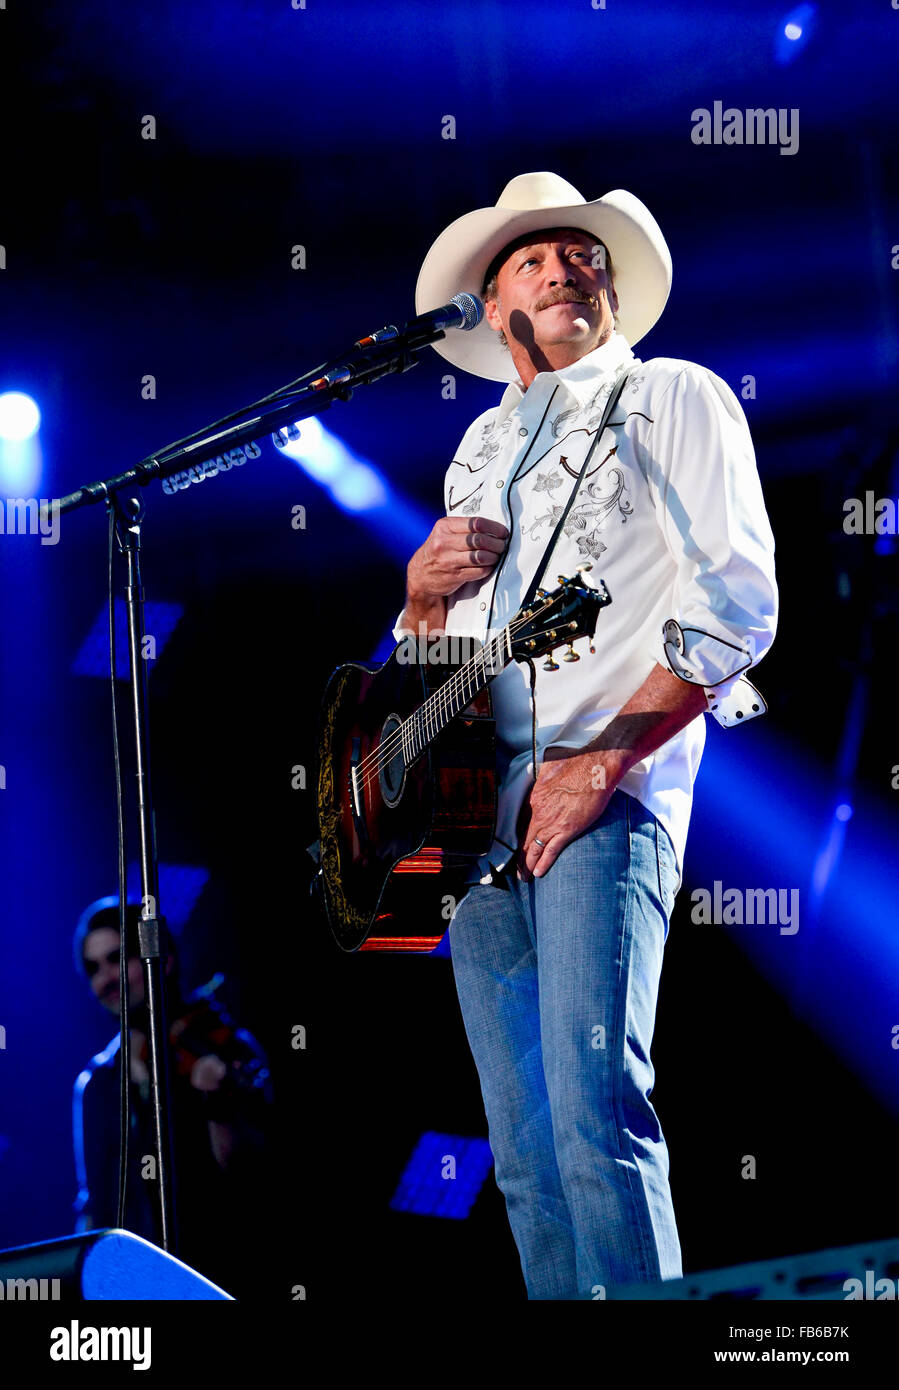 Alan Jackson performing at the CMA Music Festival in Nashville Tennessee Stock Photo